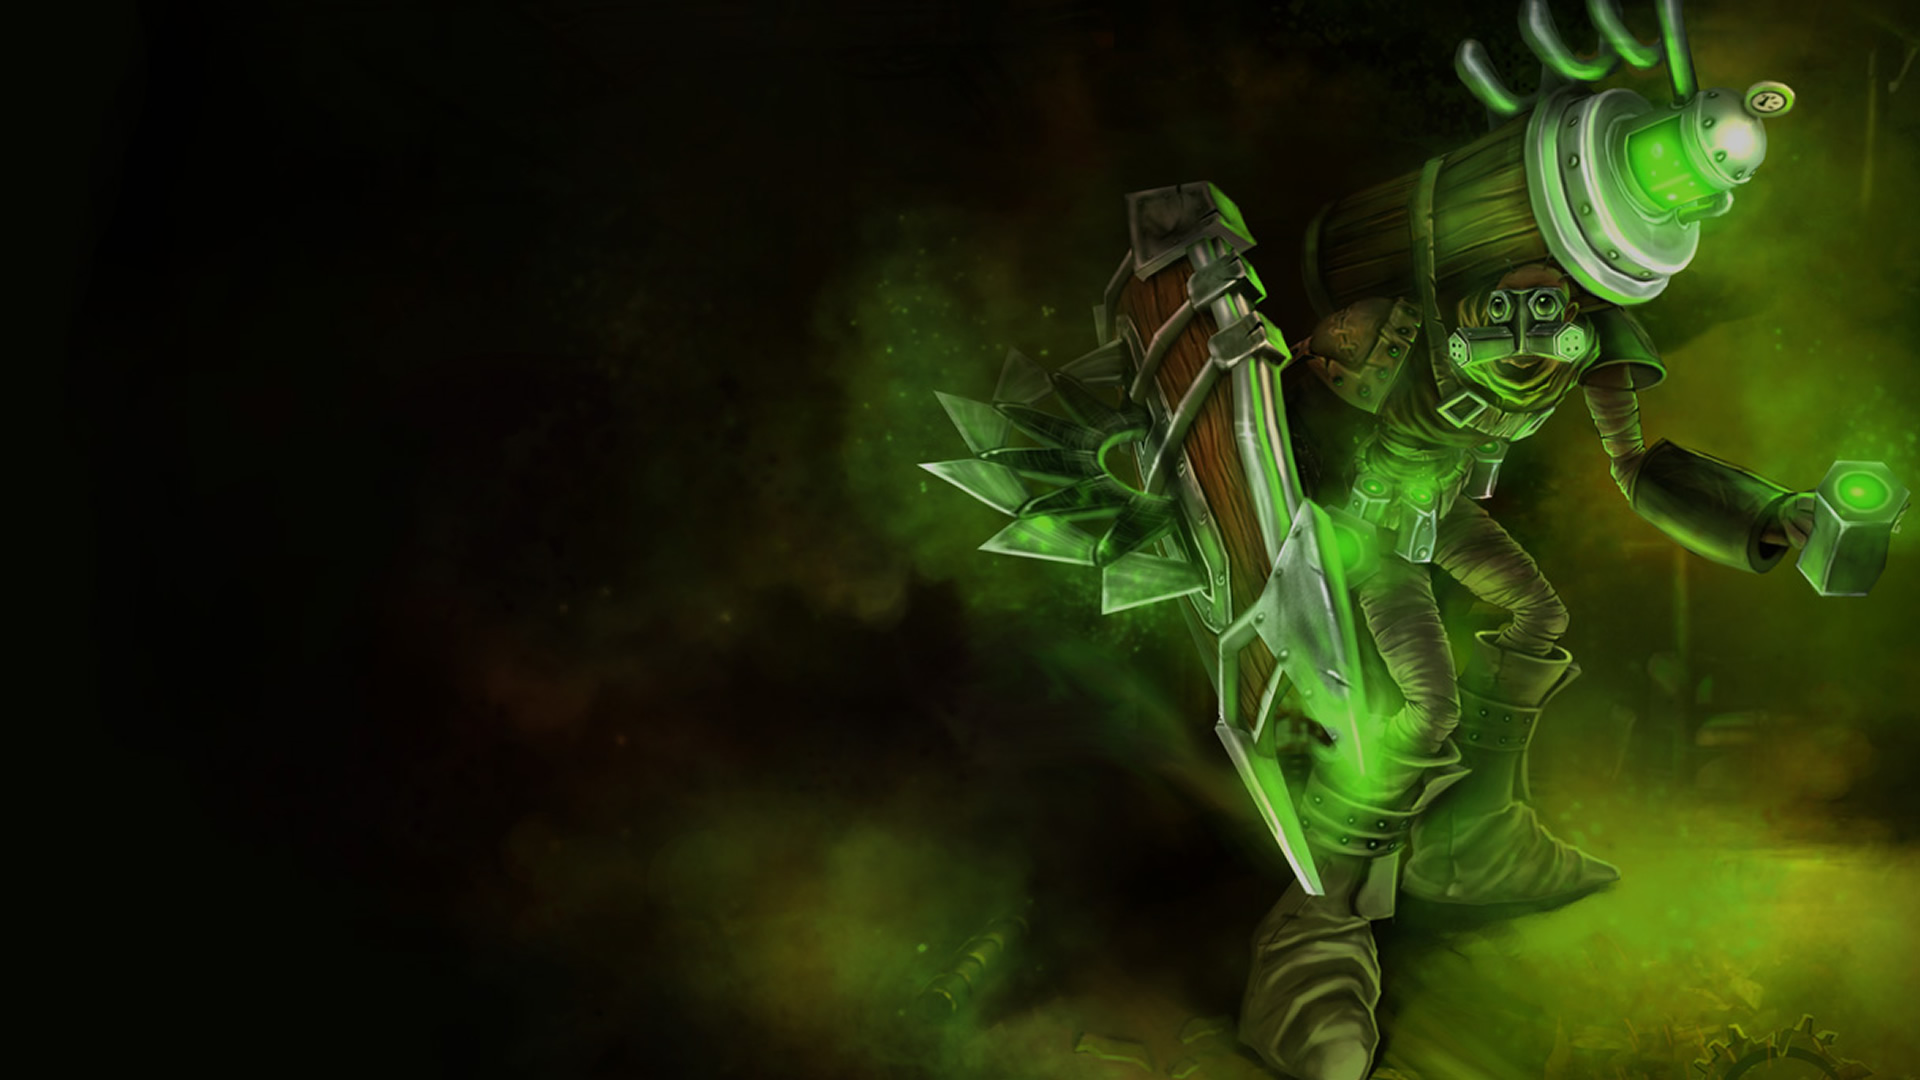 Singed League Of Legends Wallpapers